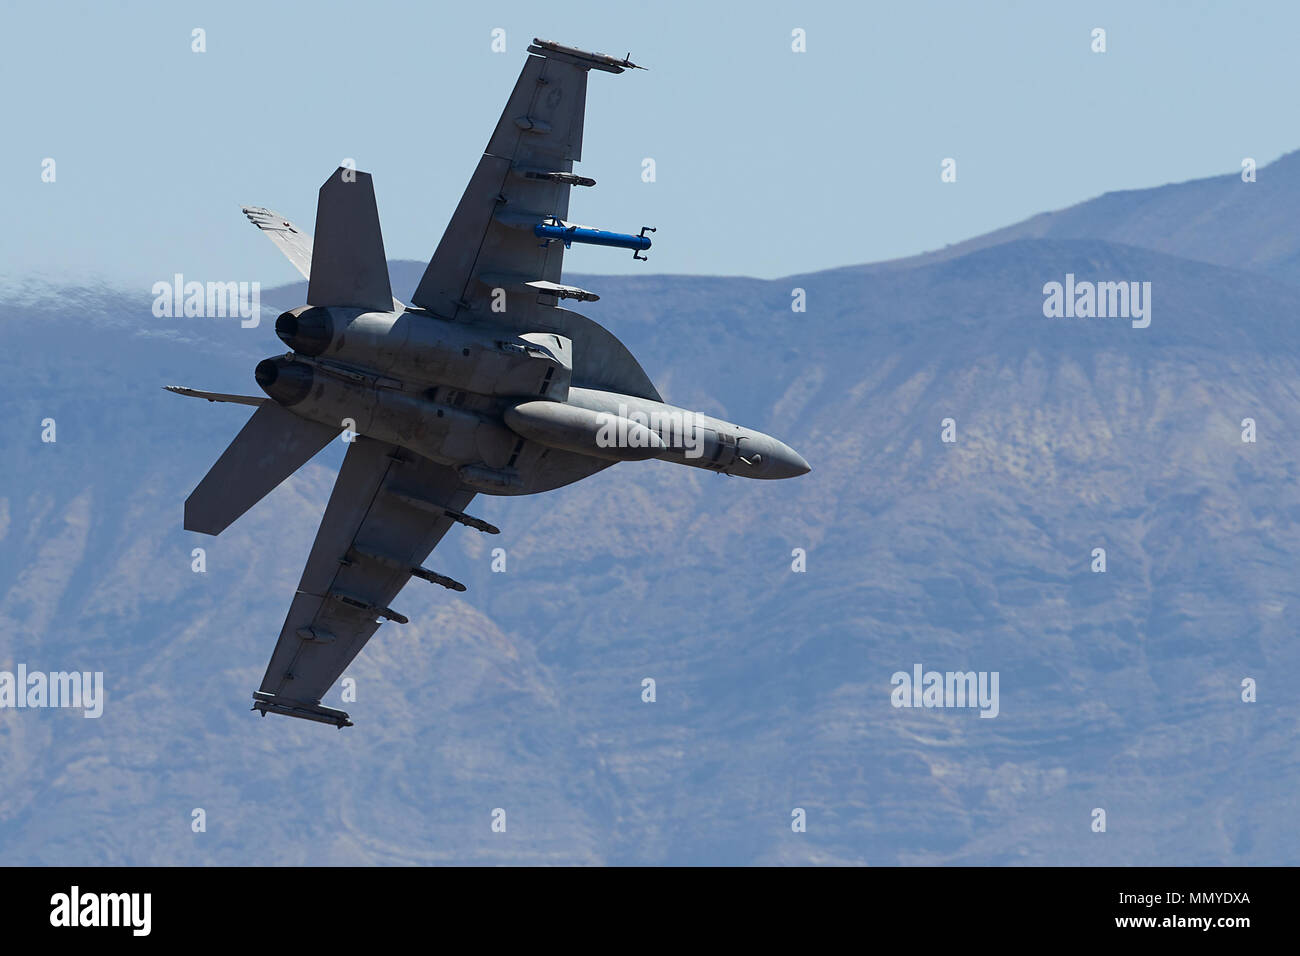 Close Up Photo Of A US Navy F/A-18E Super Hornet Jet Fighter Flying Diving Into Panamint Valley, California, USA. Stock Photo